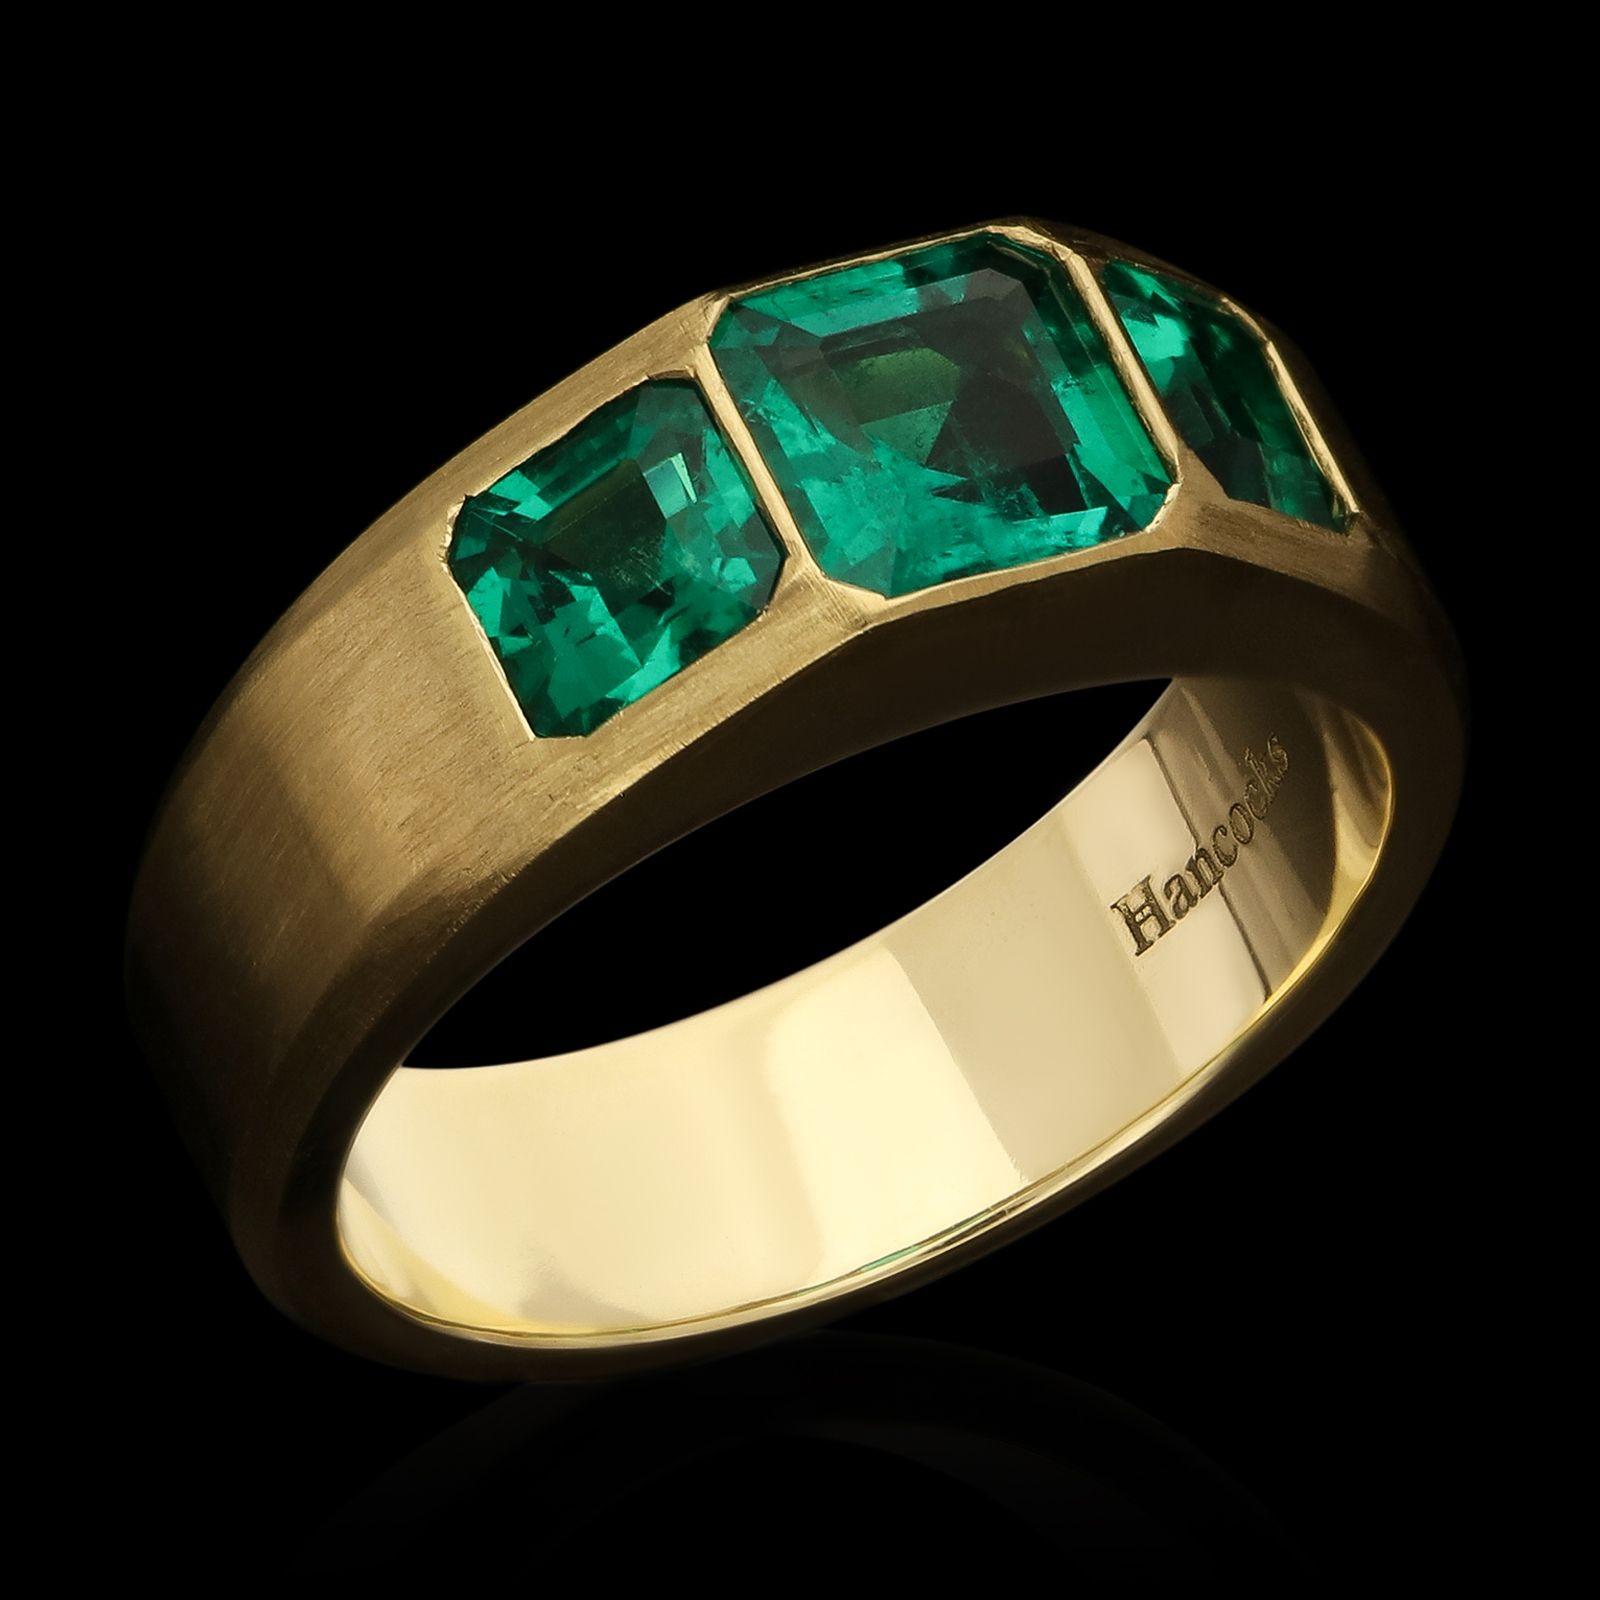 Emerald Cut Hancocks 1.54ct Colombian Emerald and 18ct Gold Three Stone Ring For Sale